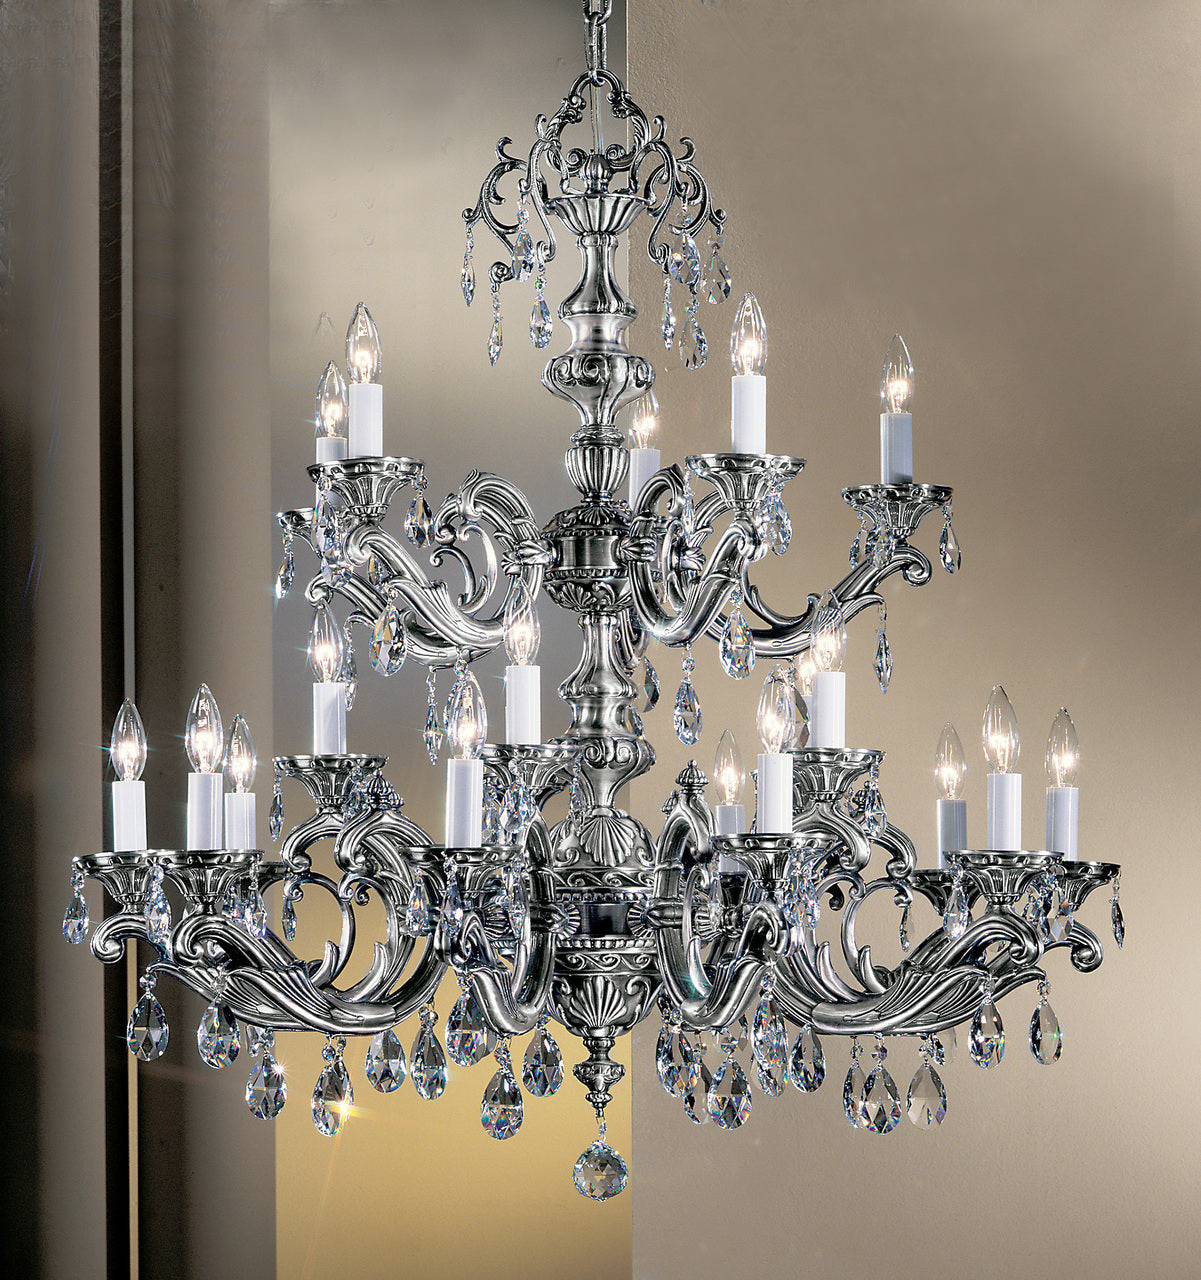 Classic Lighting 57220 MS S Princeton II Crystal Chandelier in Millennium Silver (Imported from Spain)